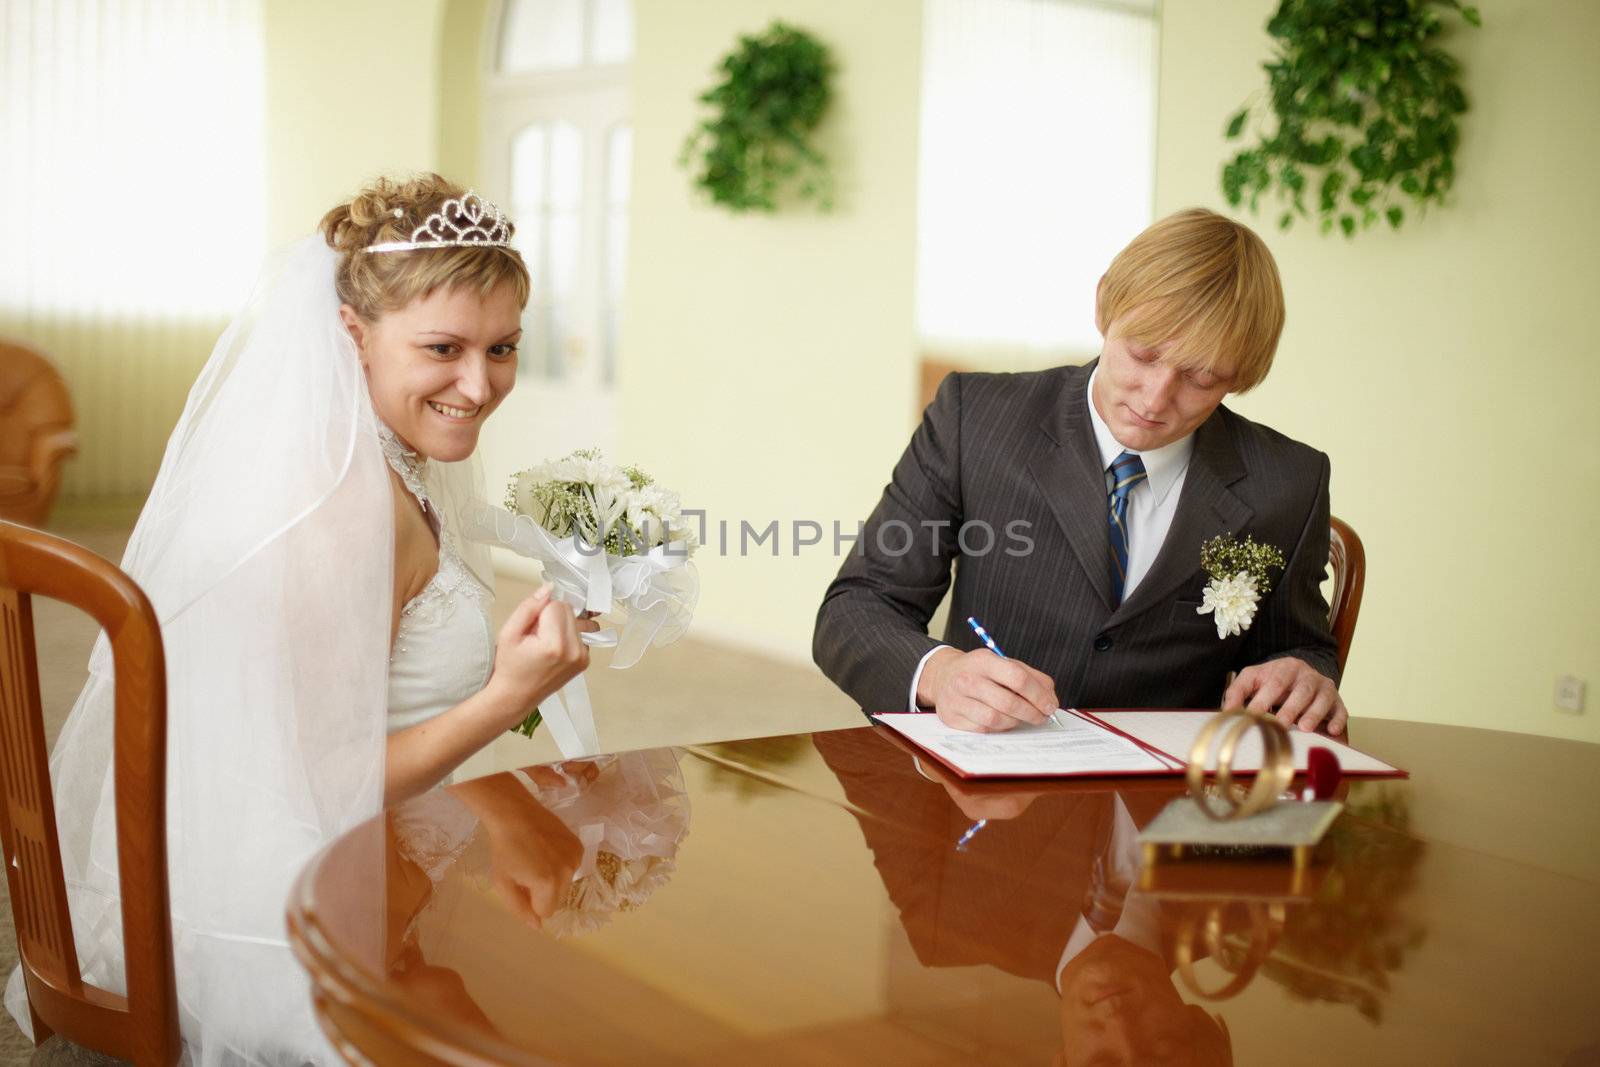 Solemn registration - the wedding ceremony. The bride and groom at the table